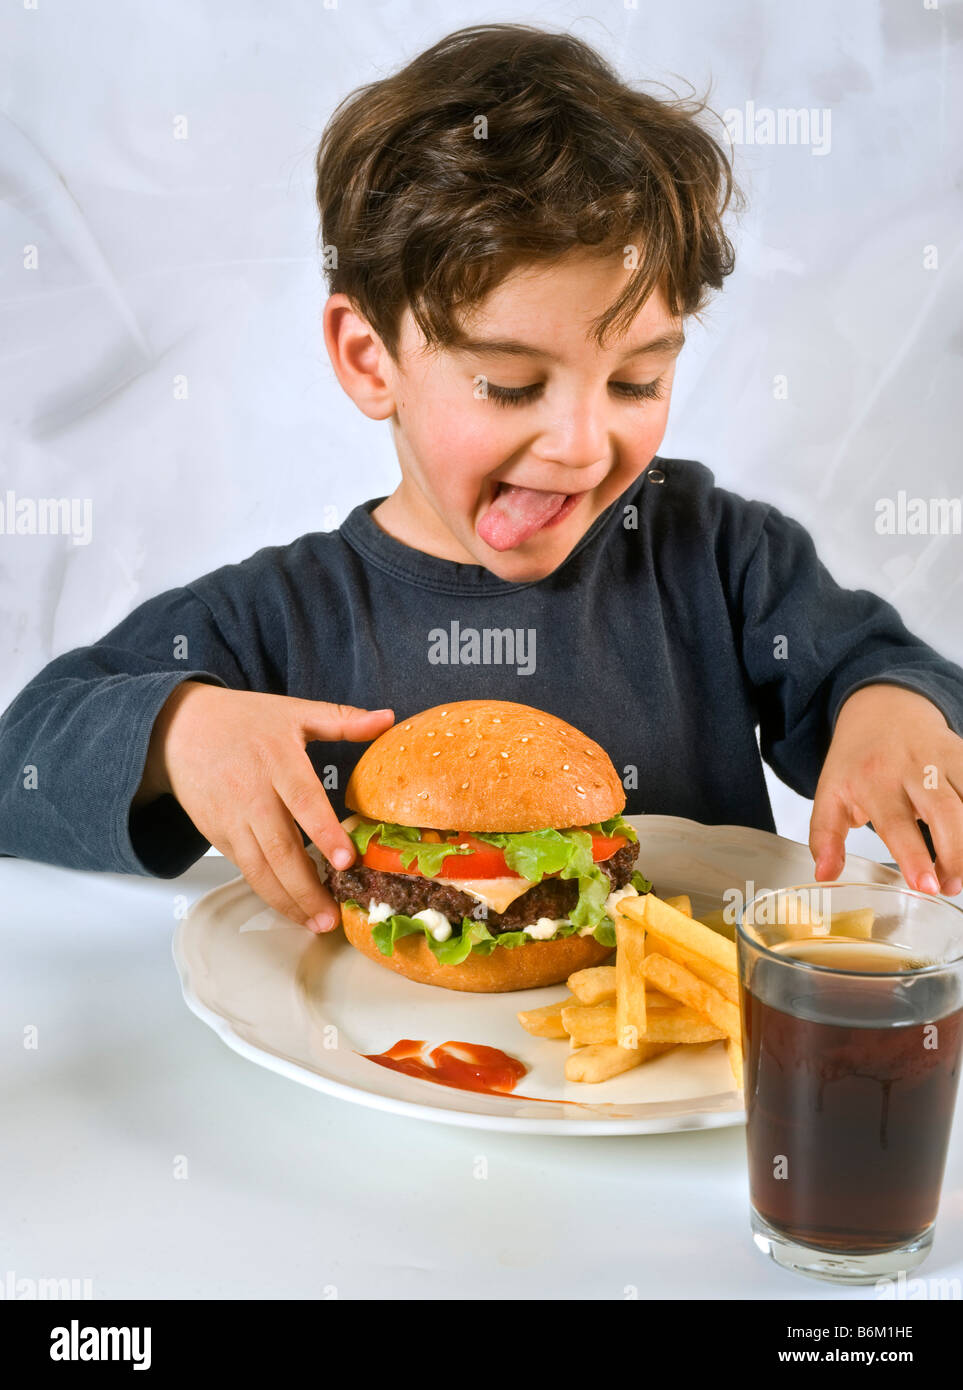 young boy eating chessburger with french fries and coke Stock Photo